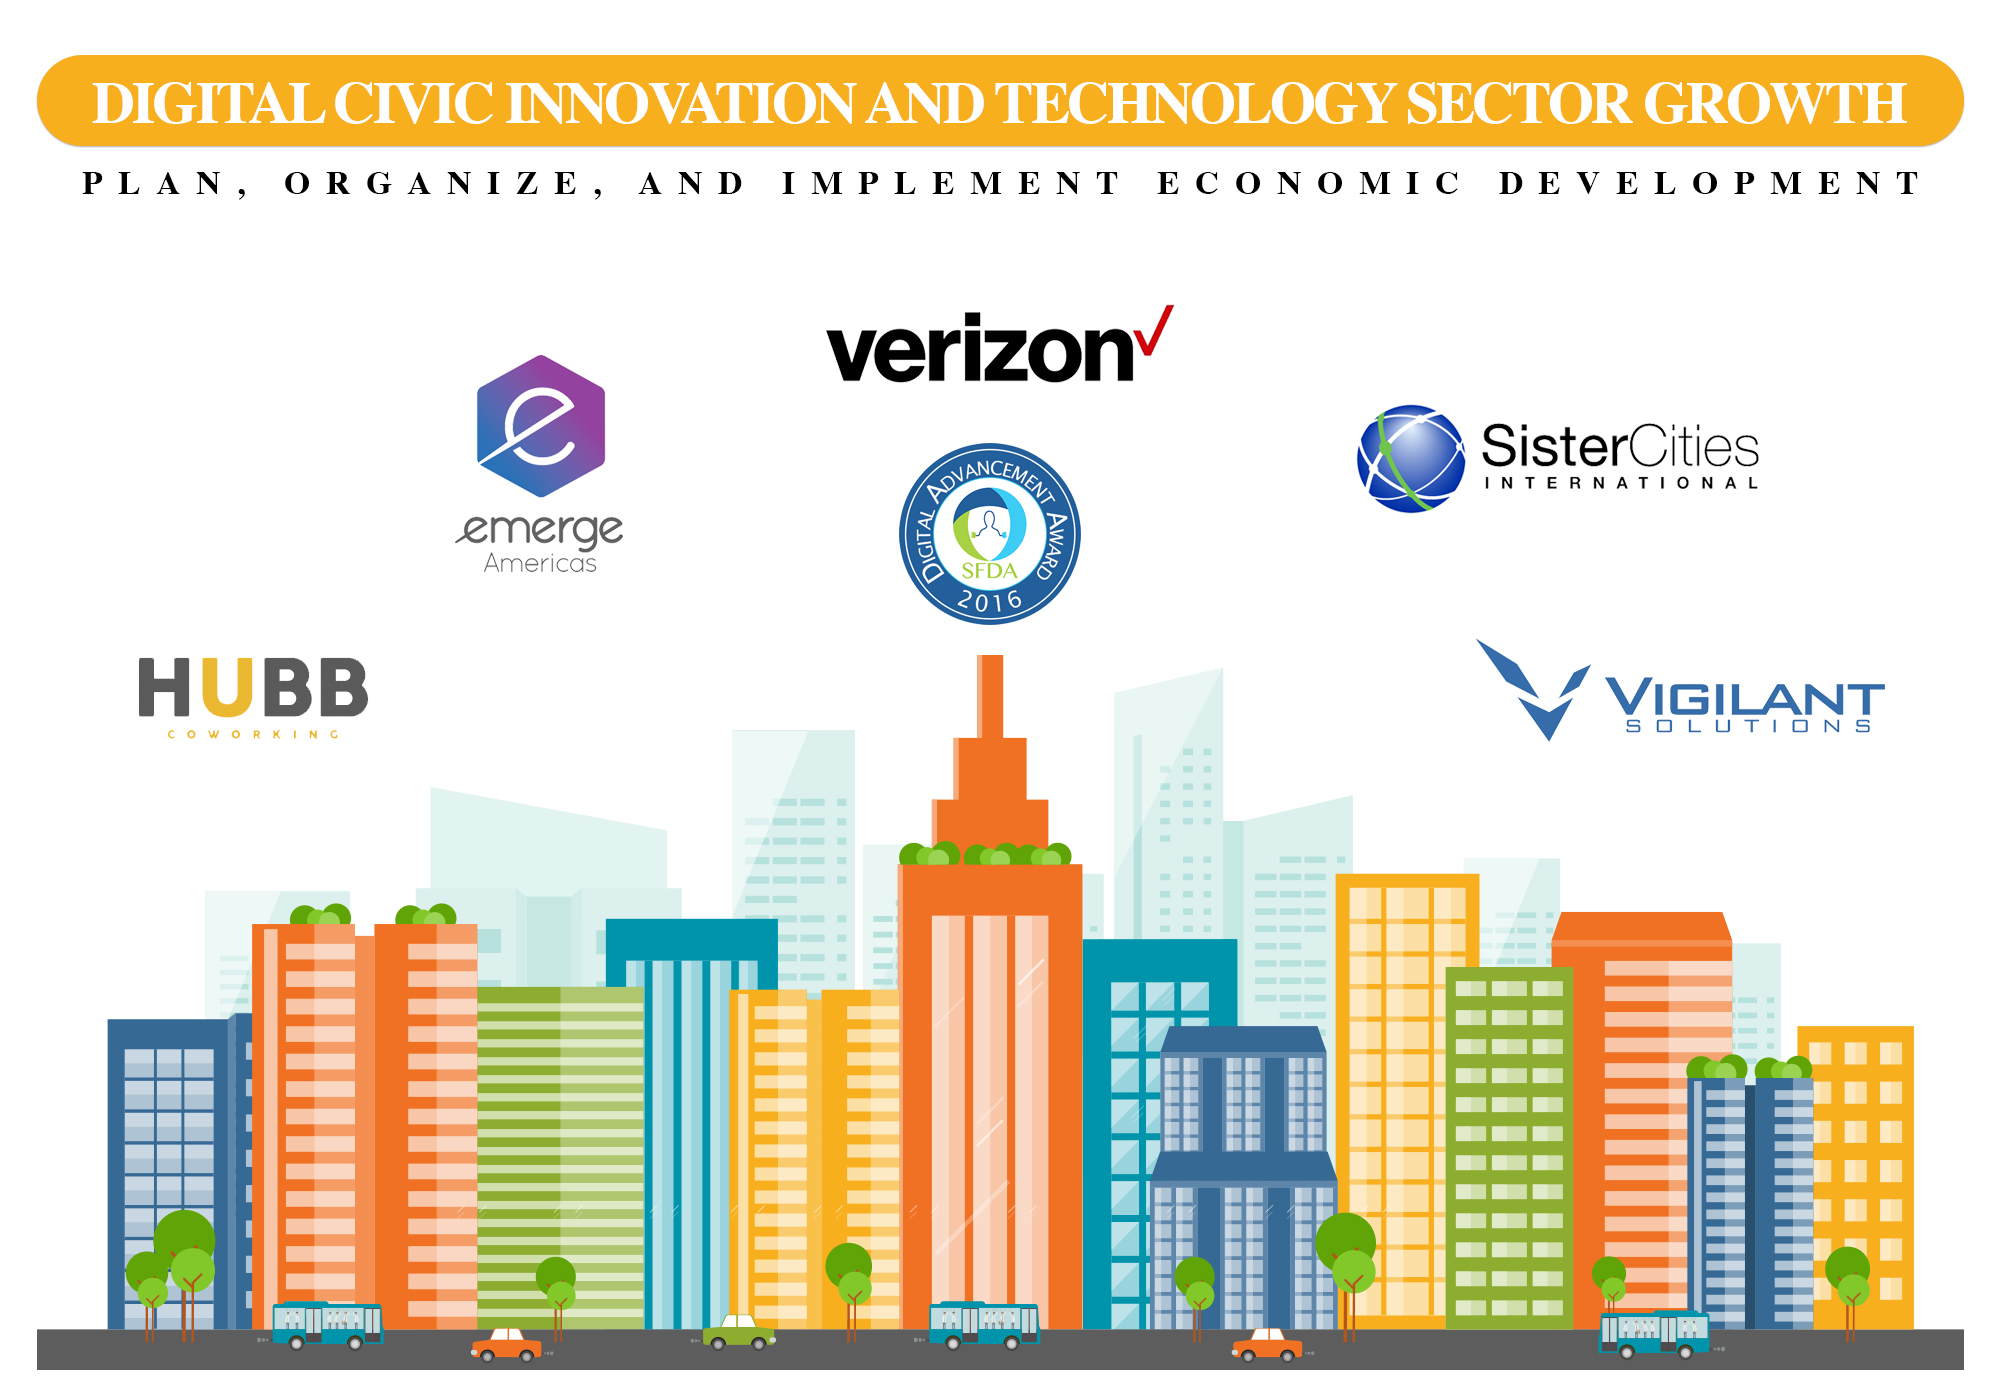 Digital Civic Innovation and Technology Sector Growth